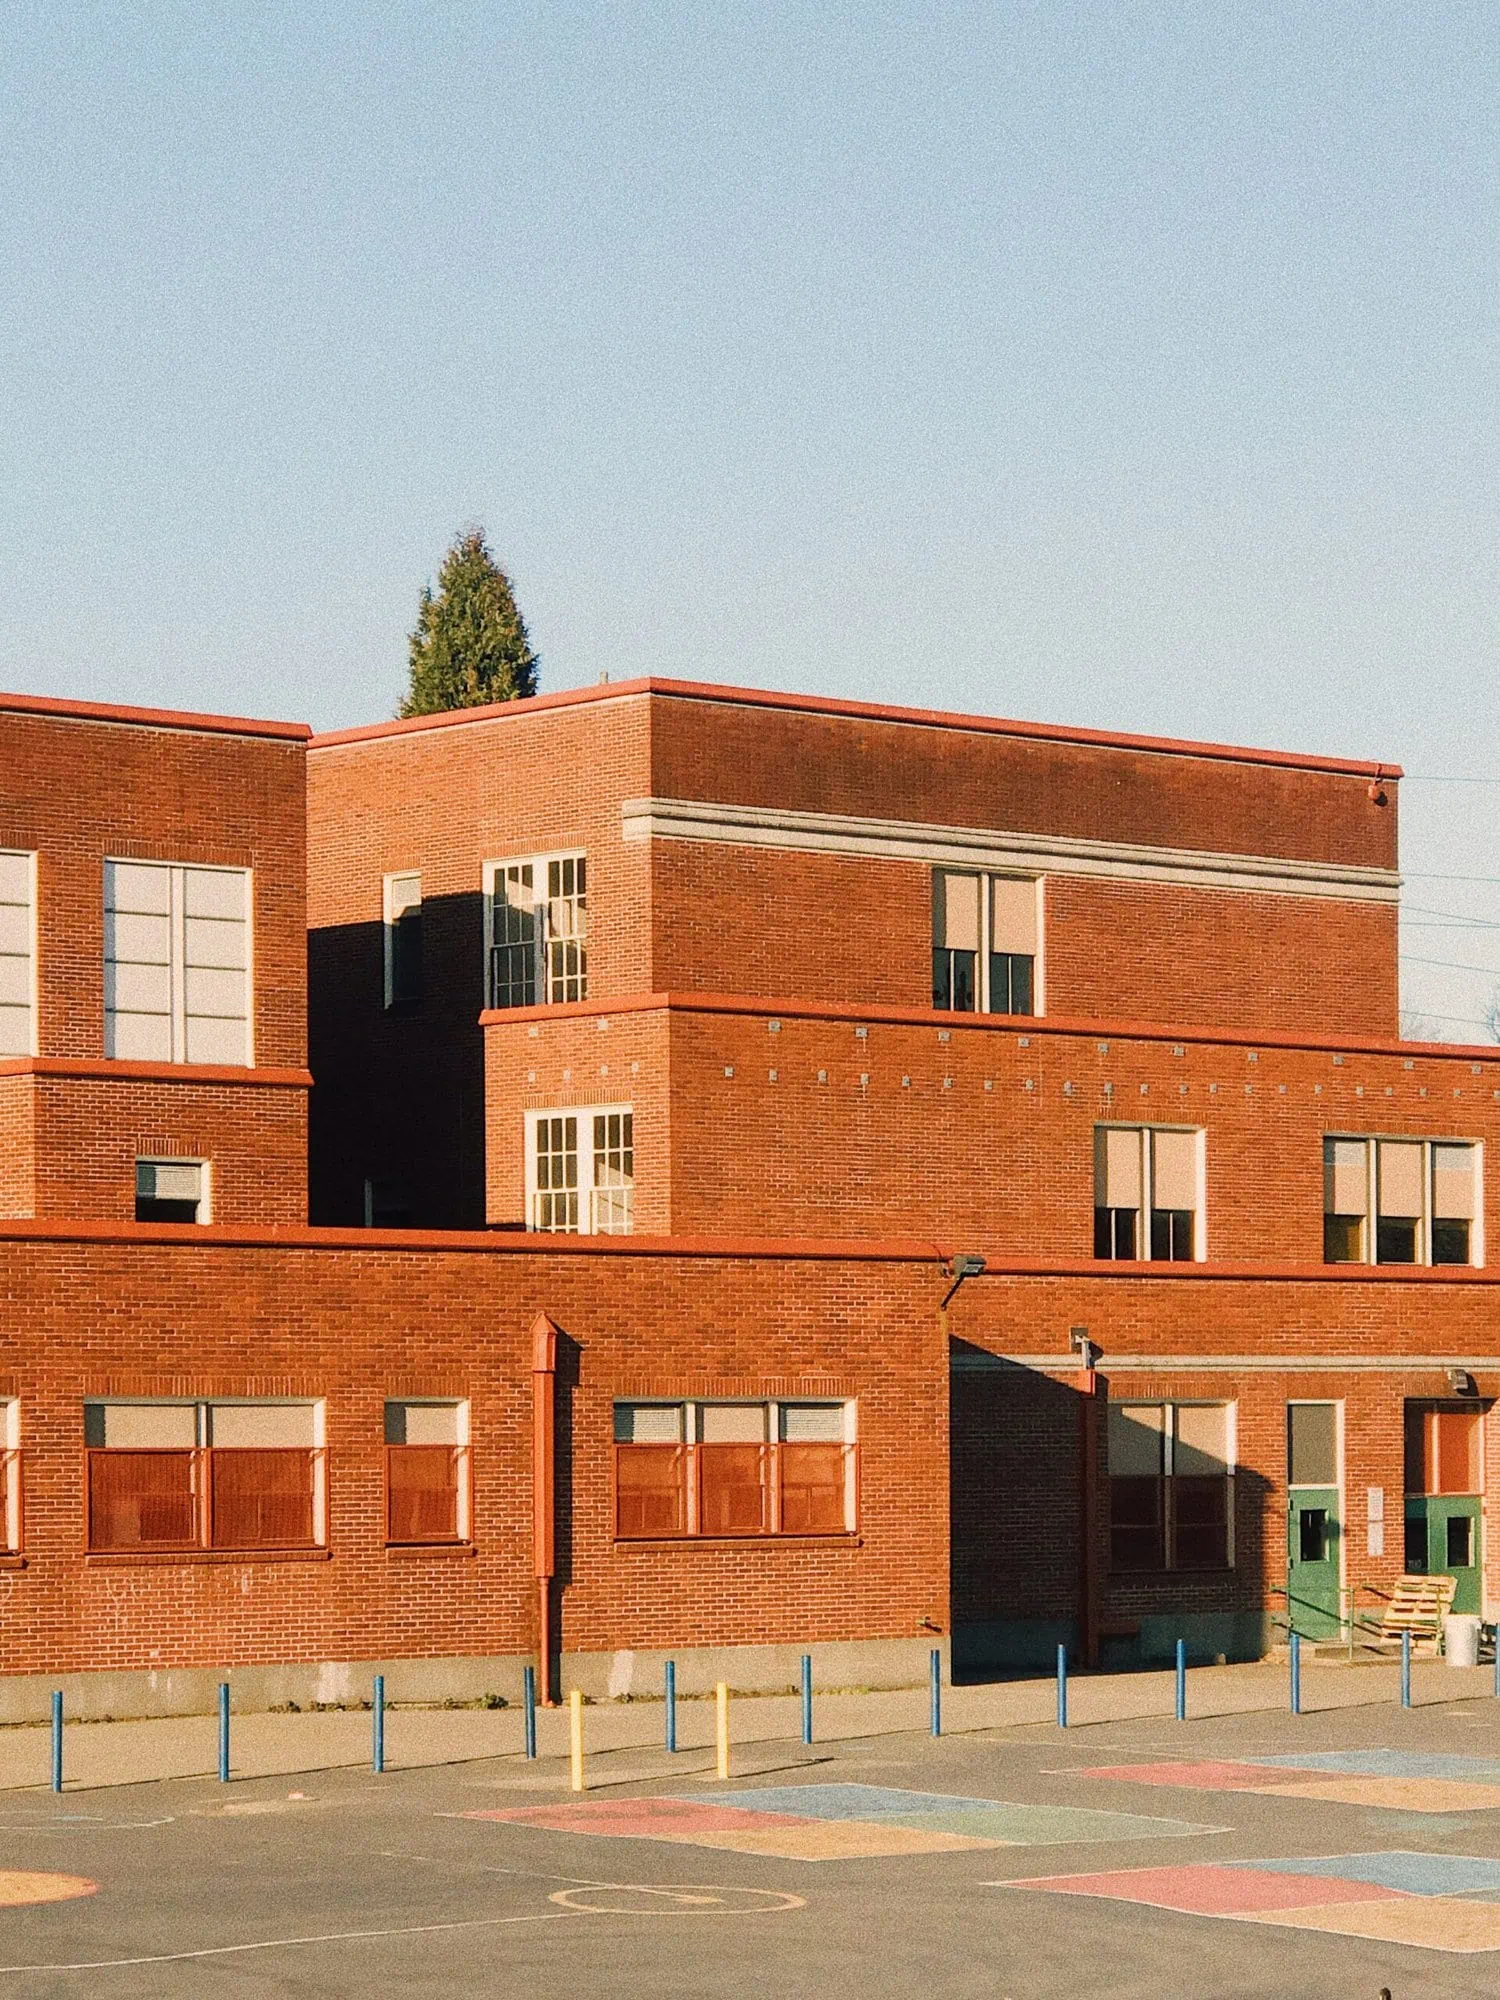 School building protected by lockdown system for schools